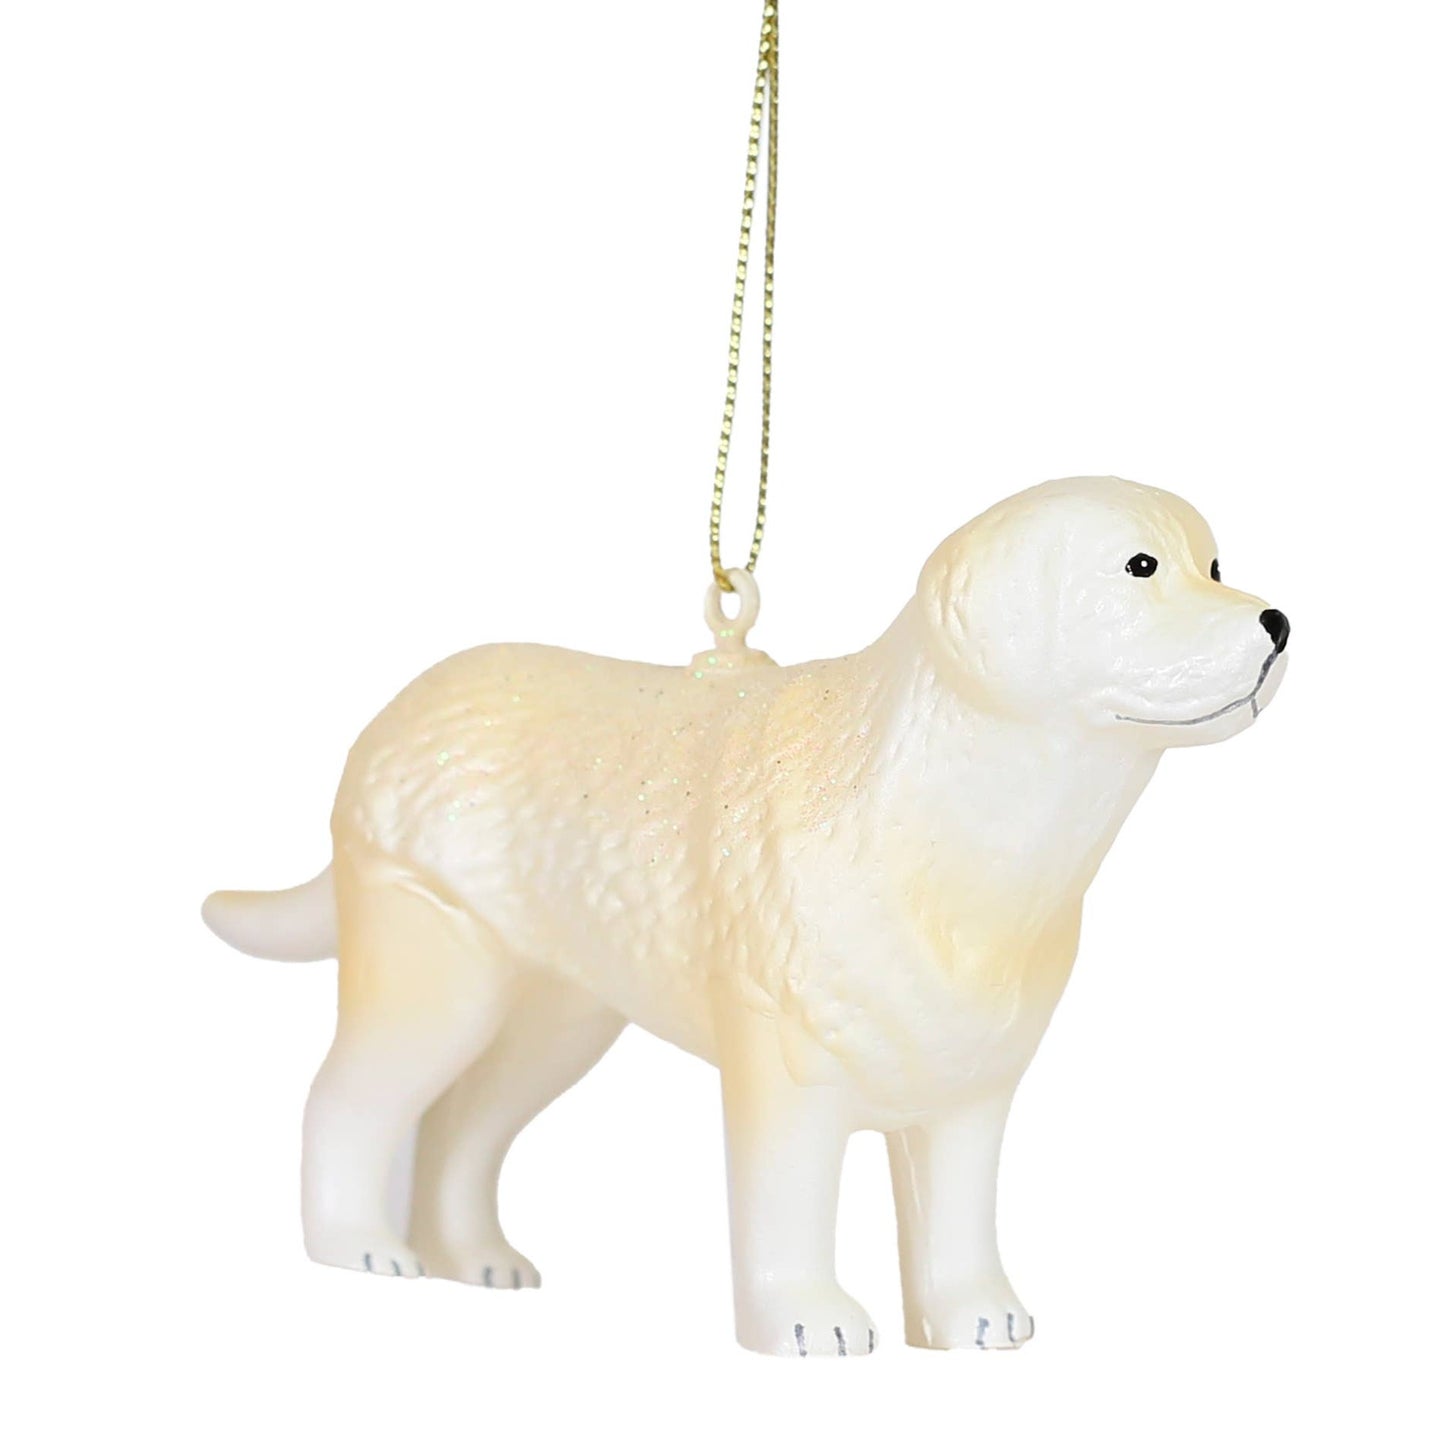 Party Rock | Yellow Lab Glass Ornament - The Crowd Went Wild